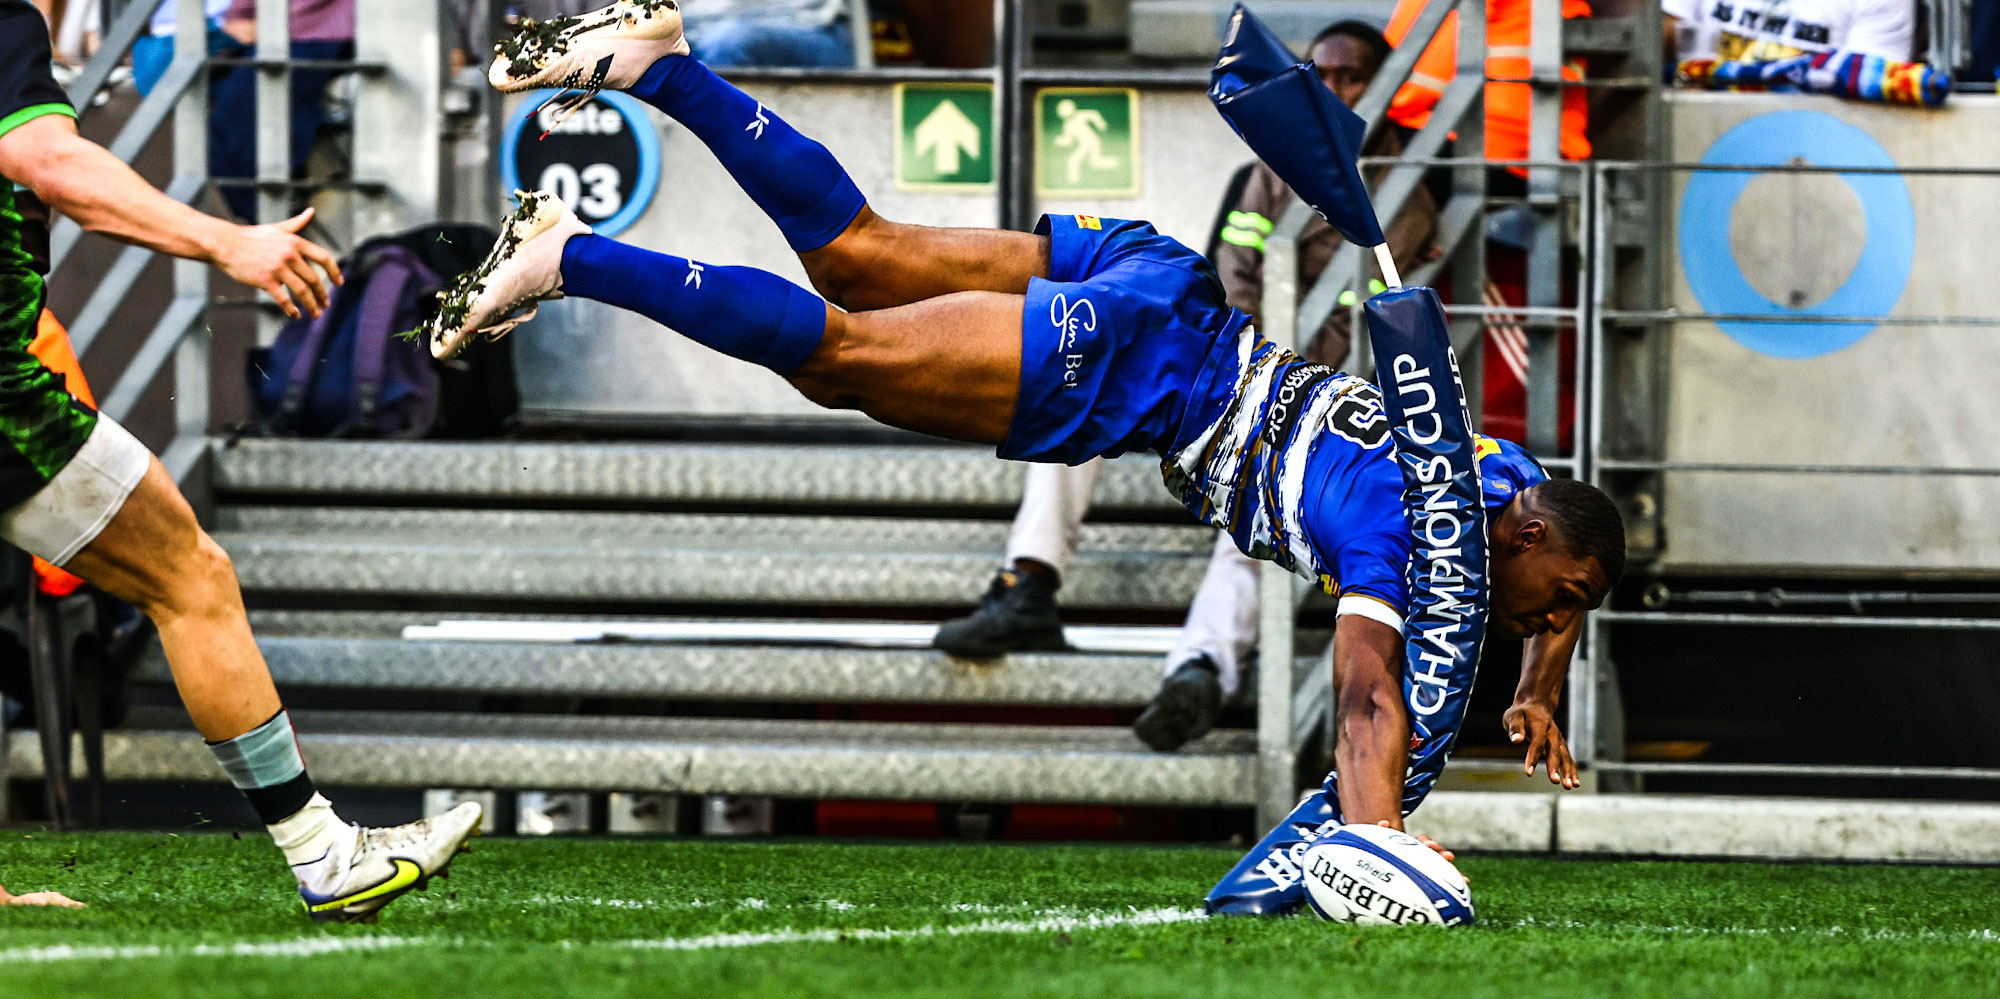 CAPE TOWN, SOUTH AFRICA - APRIL 01: Damian Willemse of the DHL Stormers dives acrobatic for a try during the Heineken Champions Cup, round of 16 match between DHL Stormers and Harlequins at DHL Stadium on April 01, 2023 in Cape Town, South Africa. (Photo by EJ Langner/Gallo Images/Getty Images)